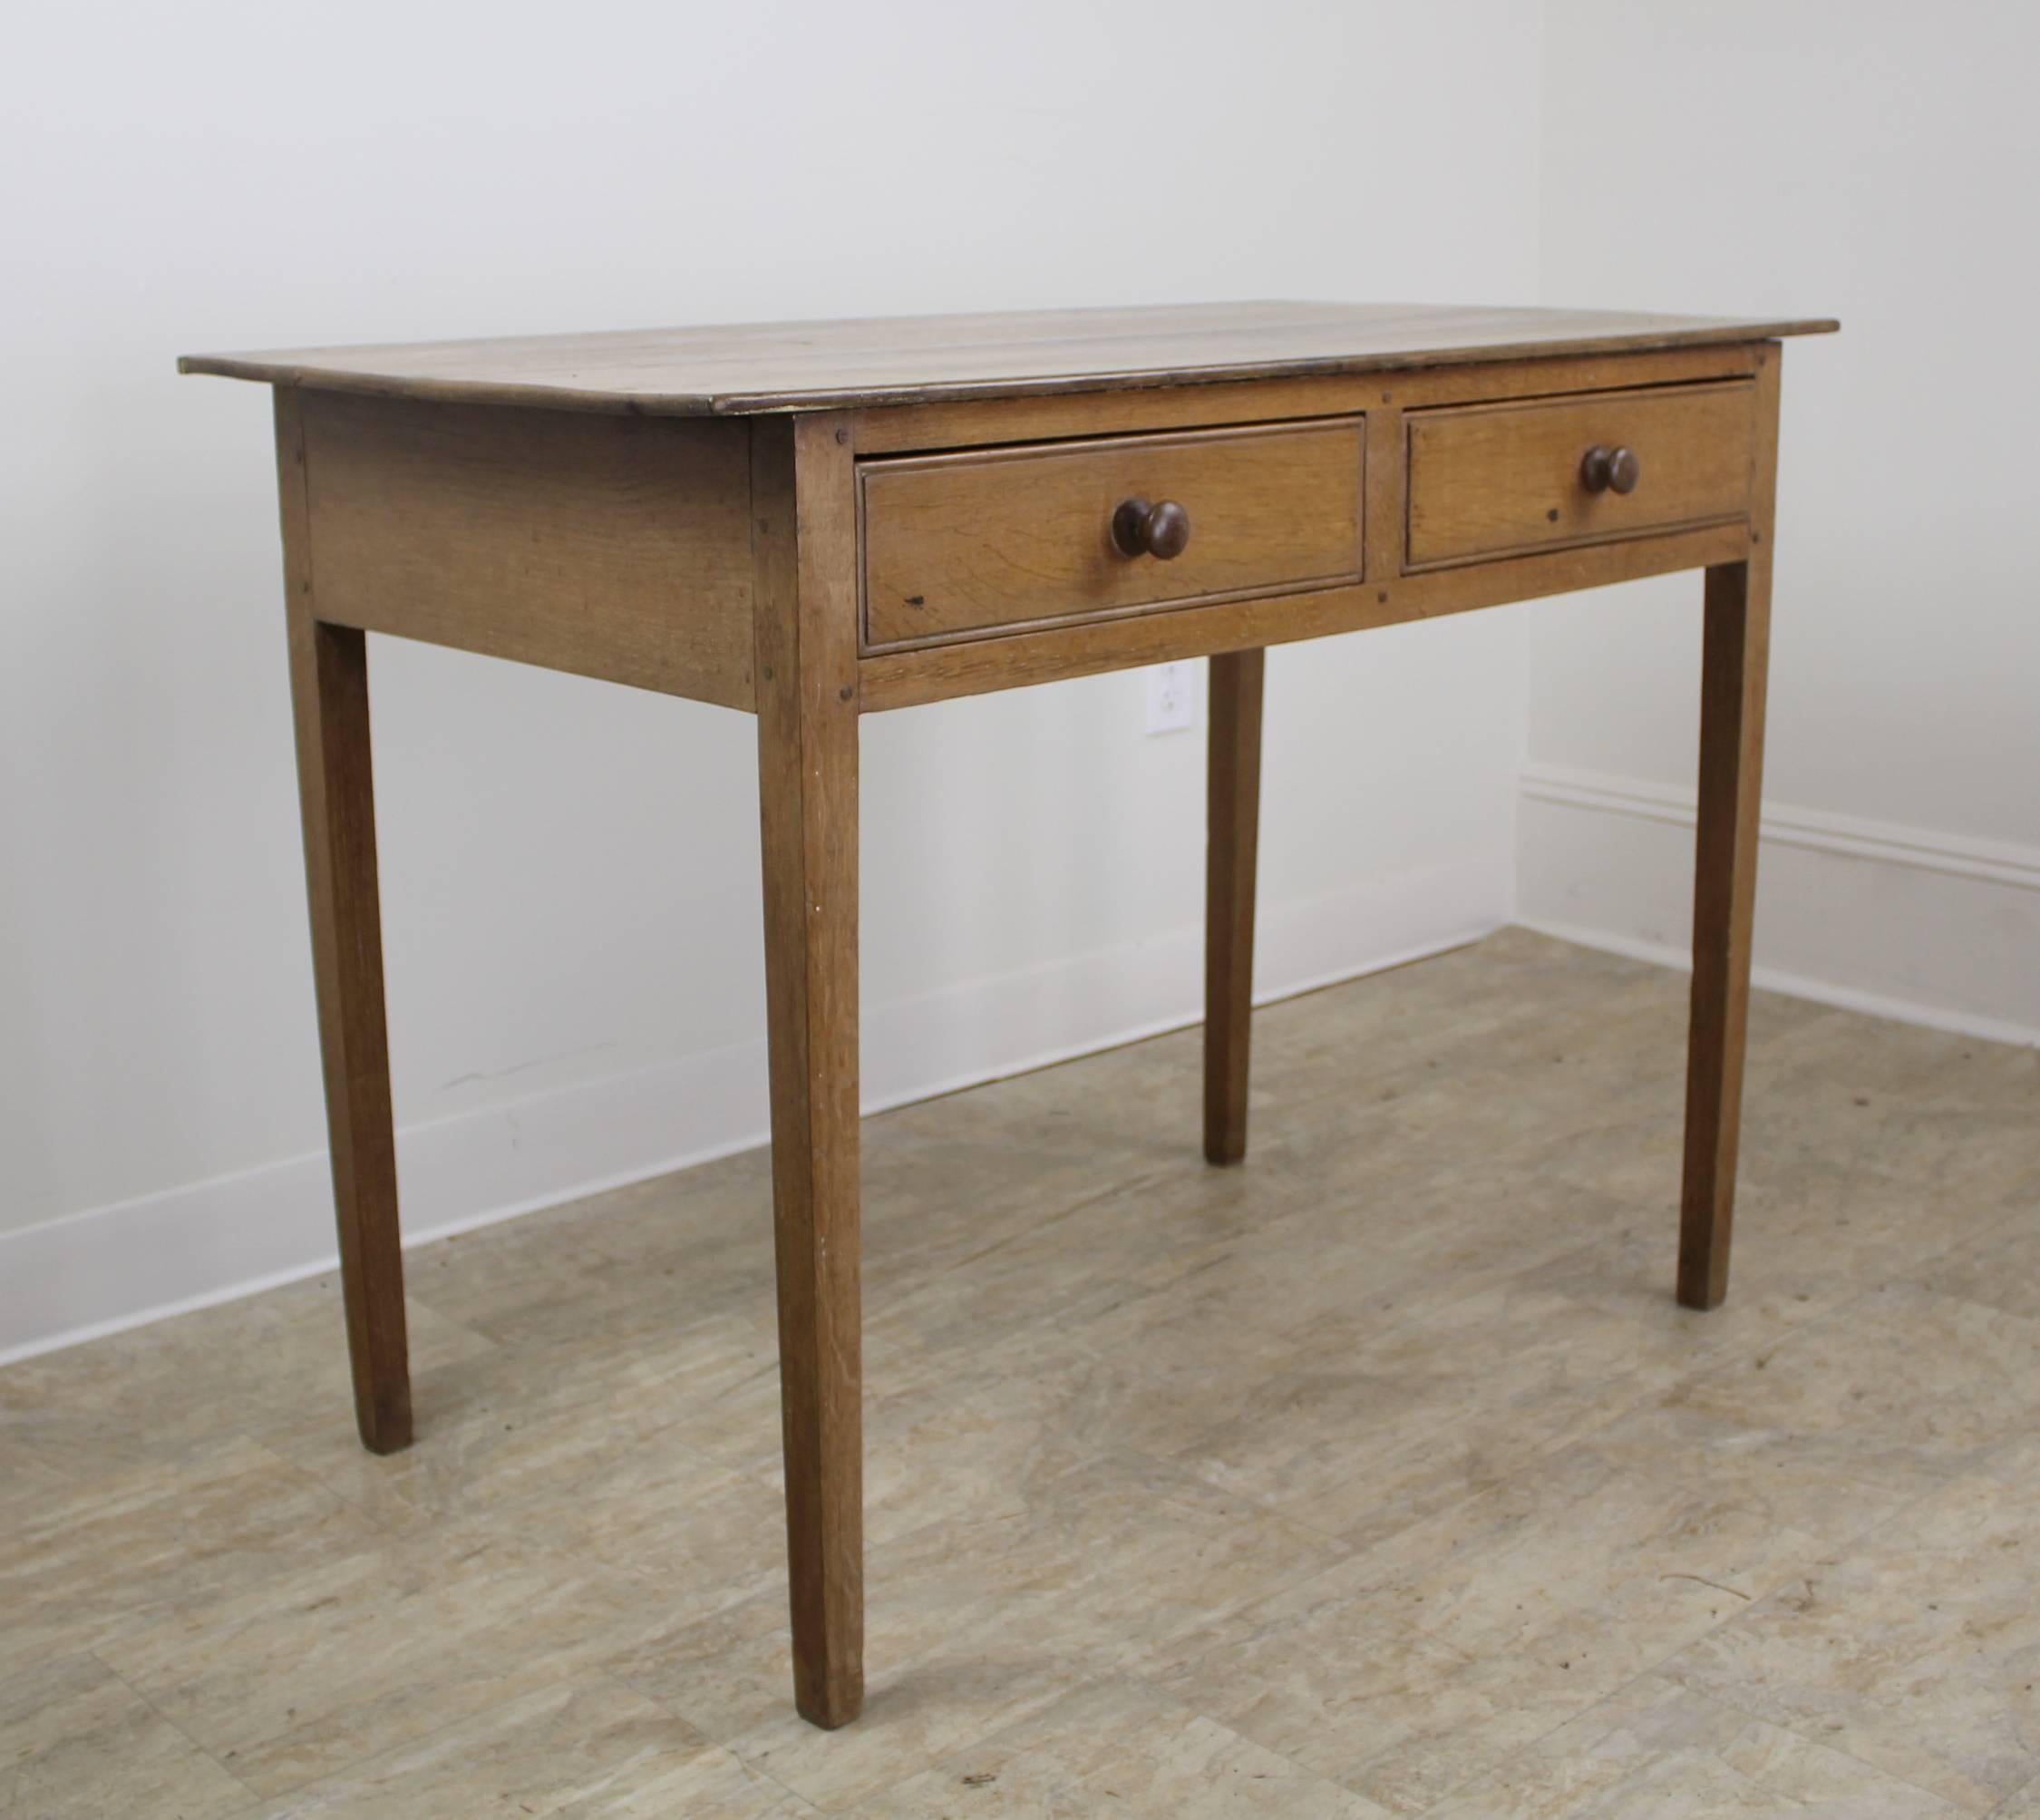 A charming desk or writing table in pickled beechwood. Two roomy drawers make this appropriate for the study or office, or in a casual living space. The pickled wood gives the piece a muted tone which blends into any look. There are some faded 19th